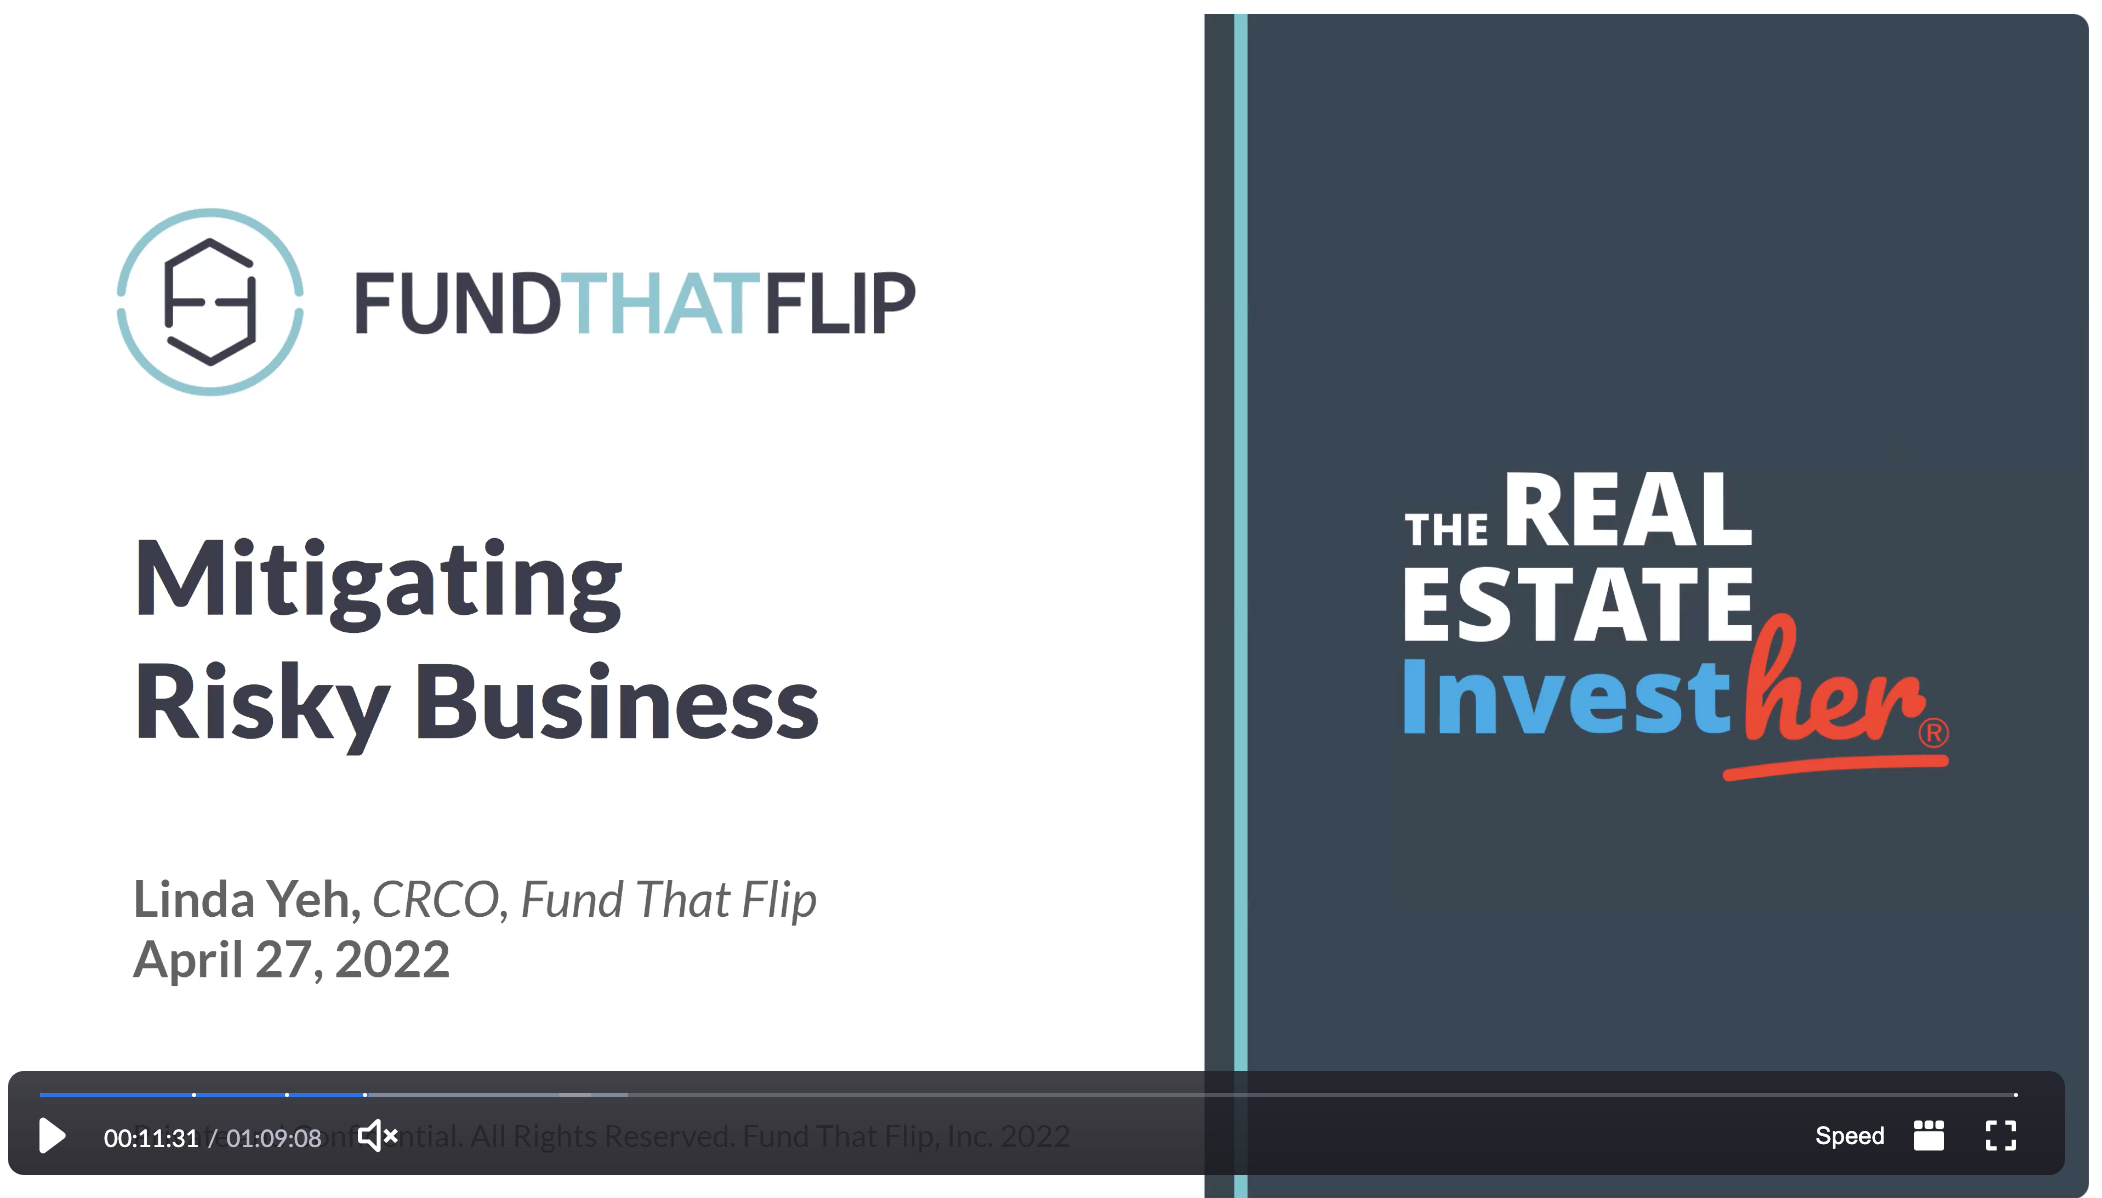 Mitigating Risky Business, a webinar presented by Linda Yeh, Fund That Flip CRCO, in partnership with The Real Estate InvestHER.